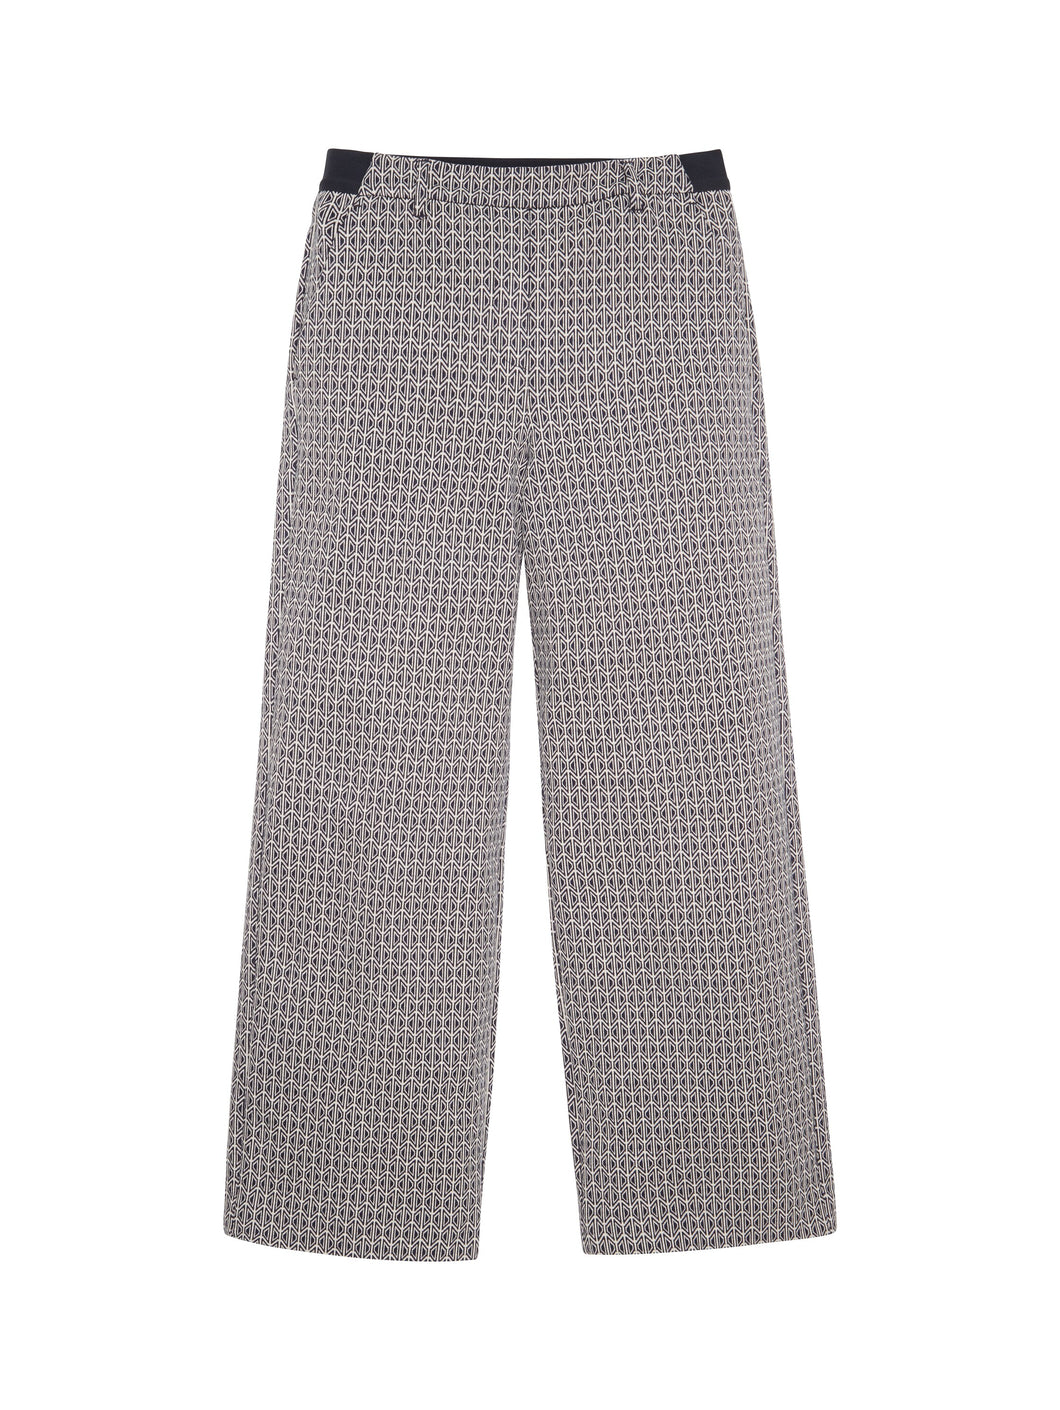 TOM TAILOR PANTS STRAIGHT CROPPED small geo ck jacquard 2 colors